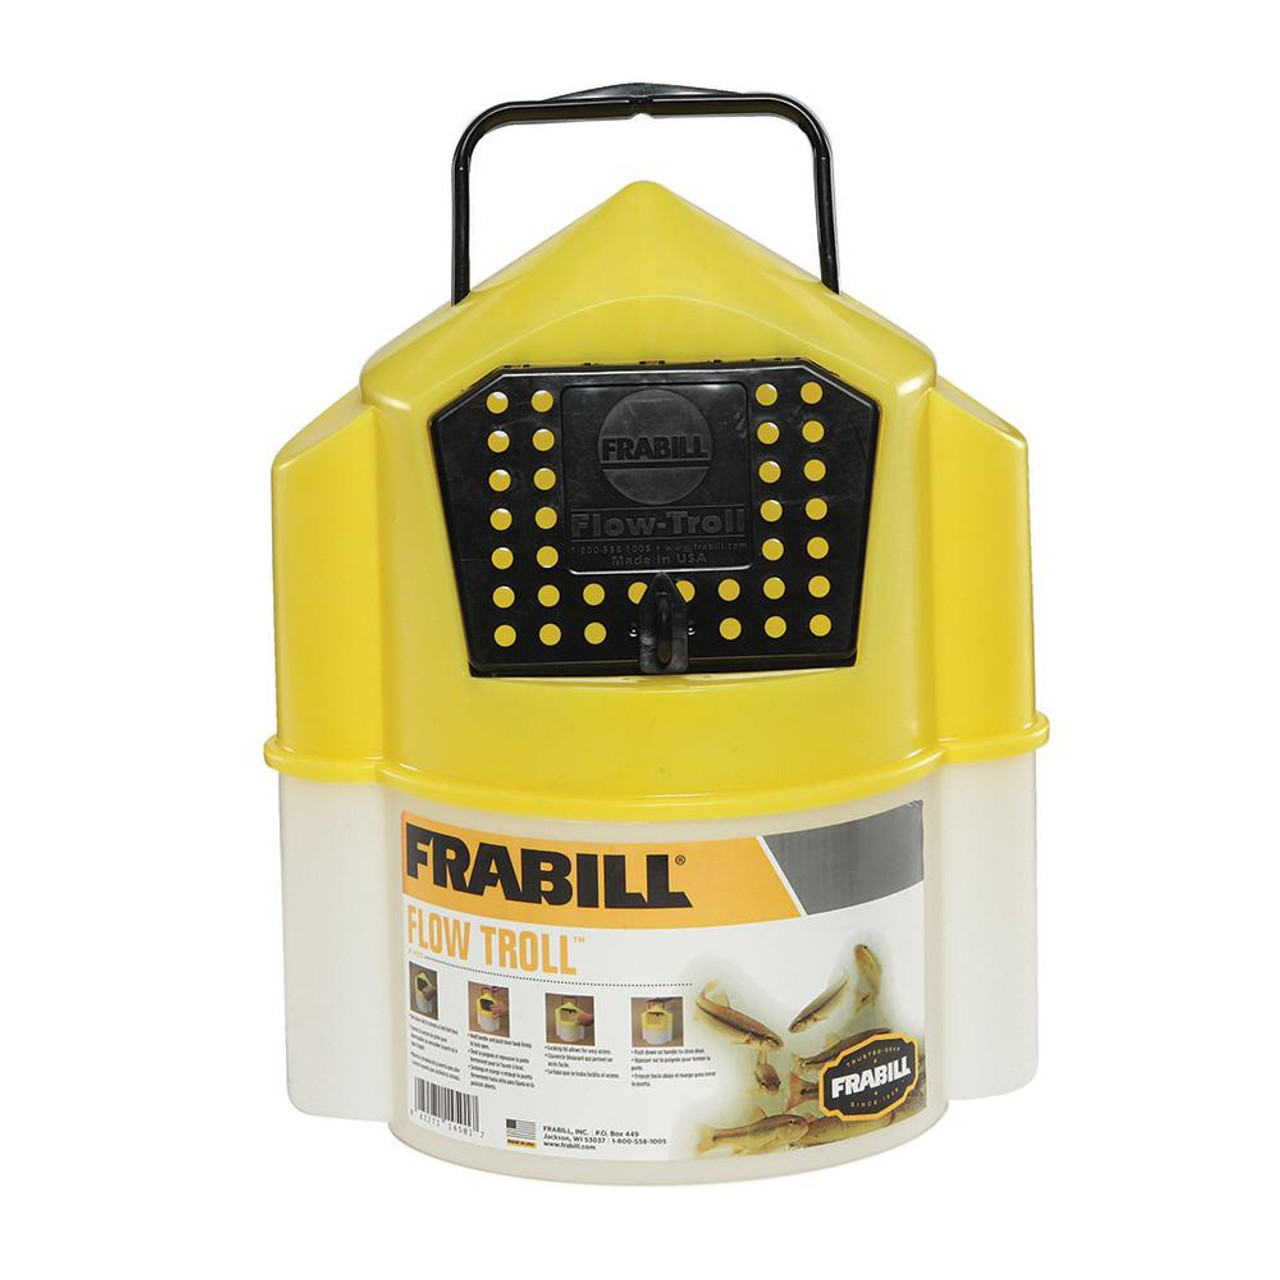 Frabill Magnum Bait Station 30 30 Quart Bait Cooler with Dual Aeration,  White and Yellow フィッシングツール